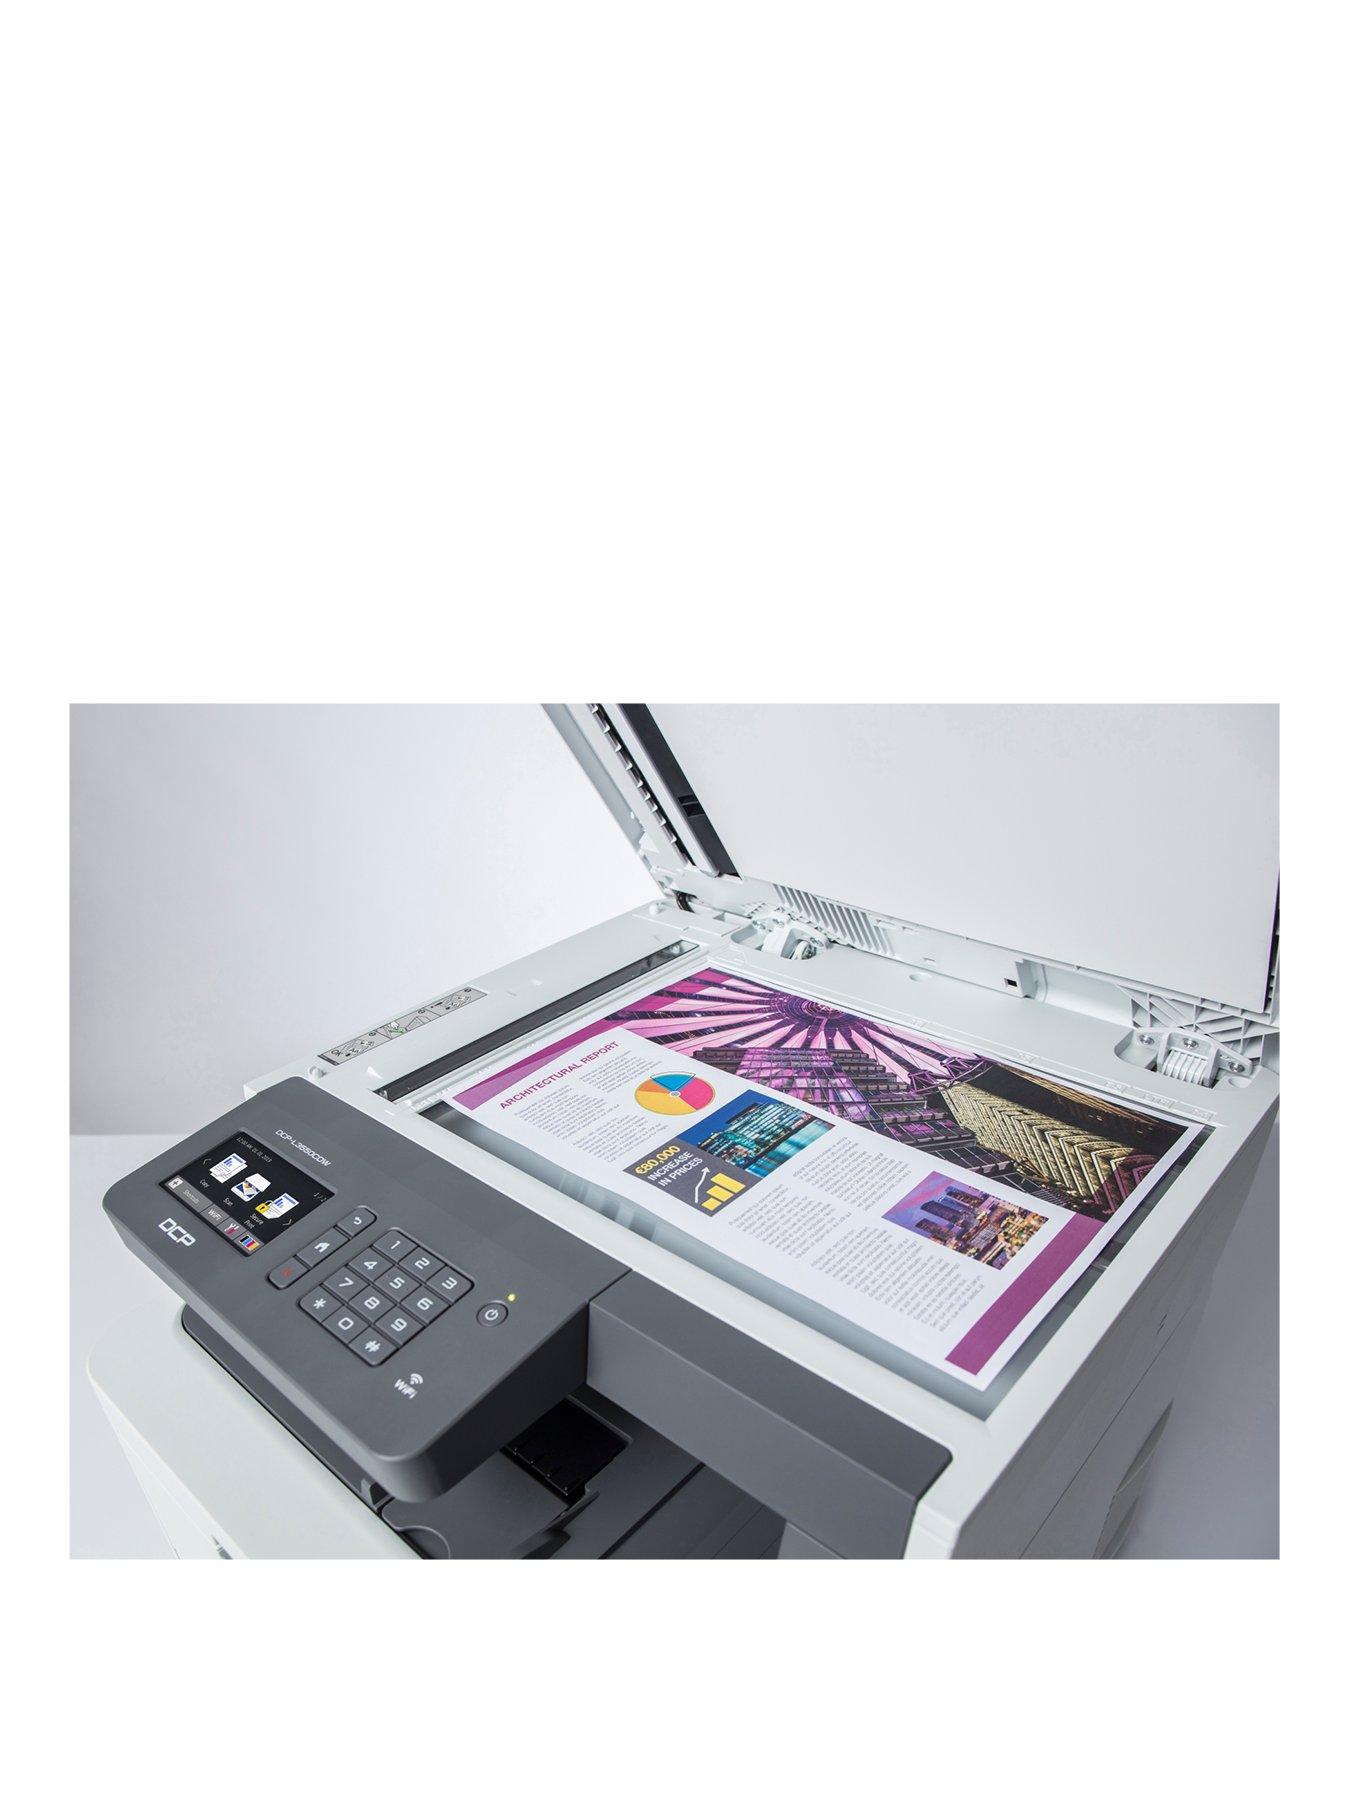 Brother DCP-L3550CDW: 3-in-1 Multifunction Laser Printer! 